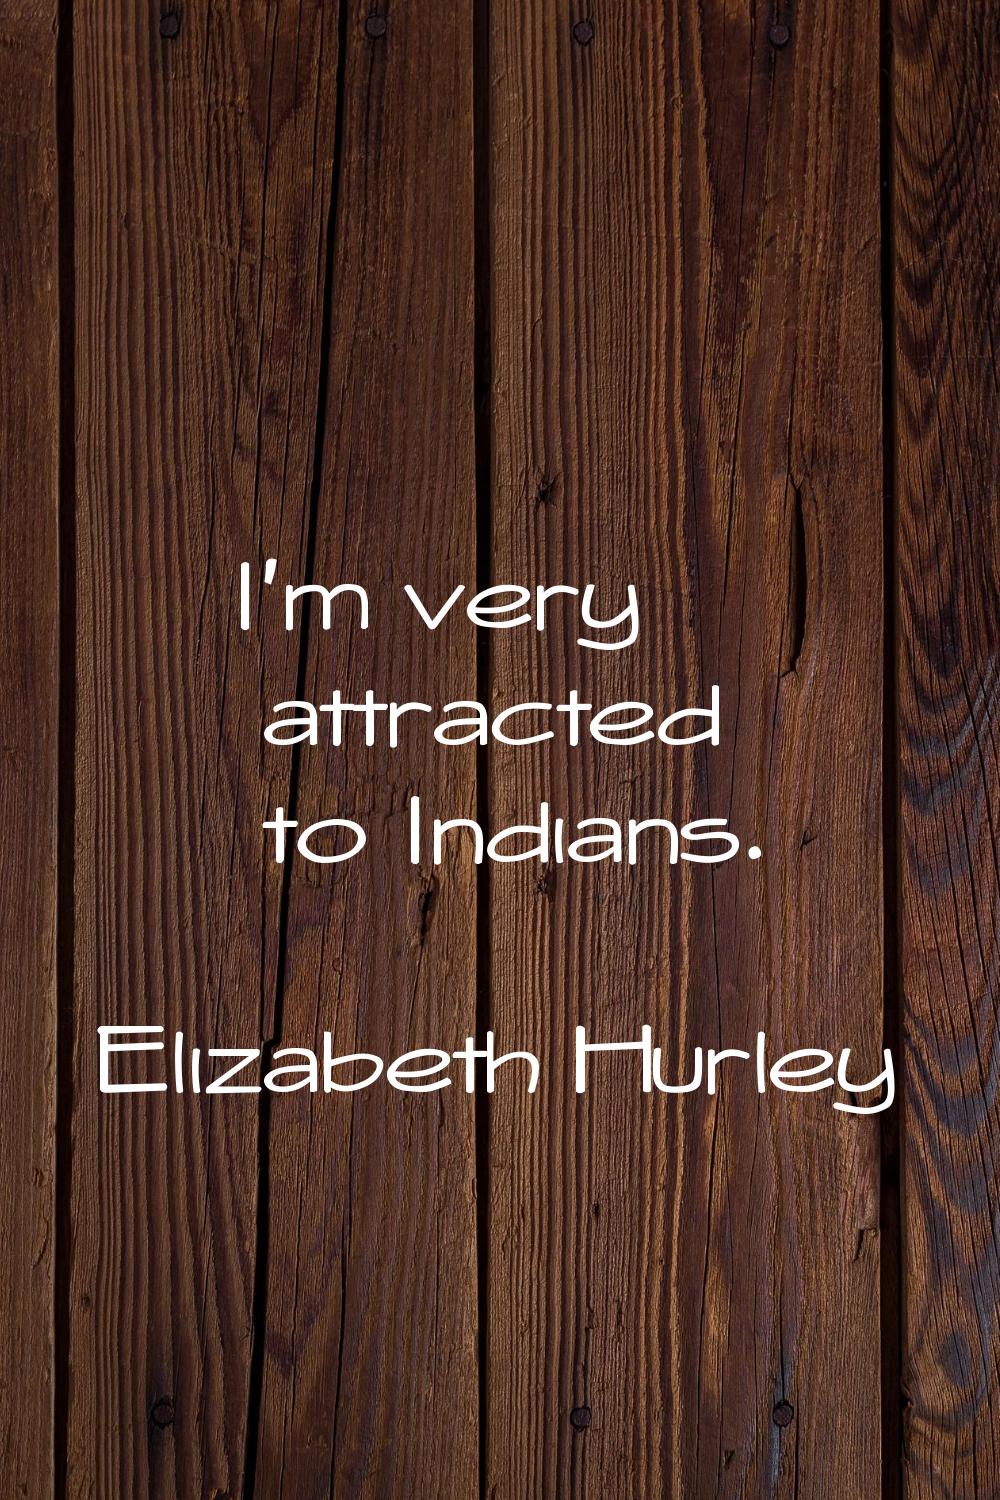 I'm very attracted to Indians.